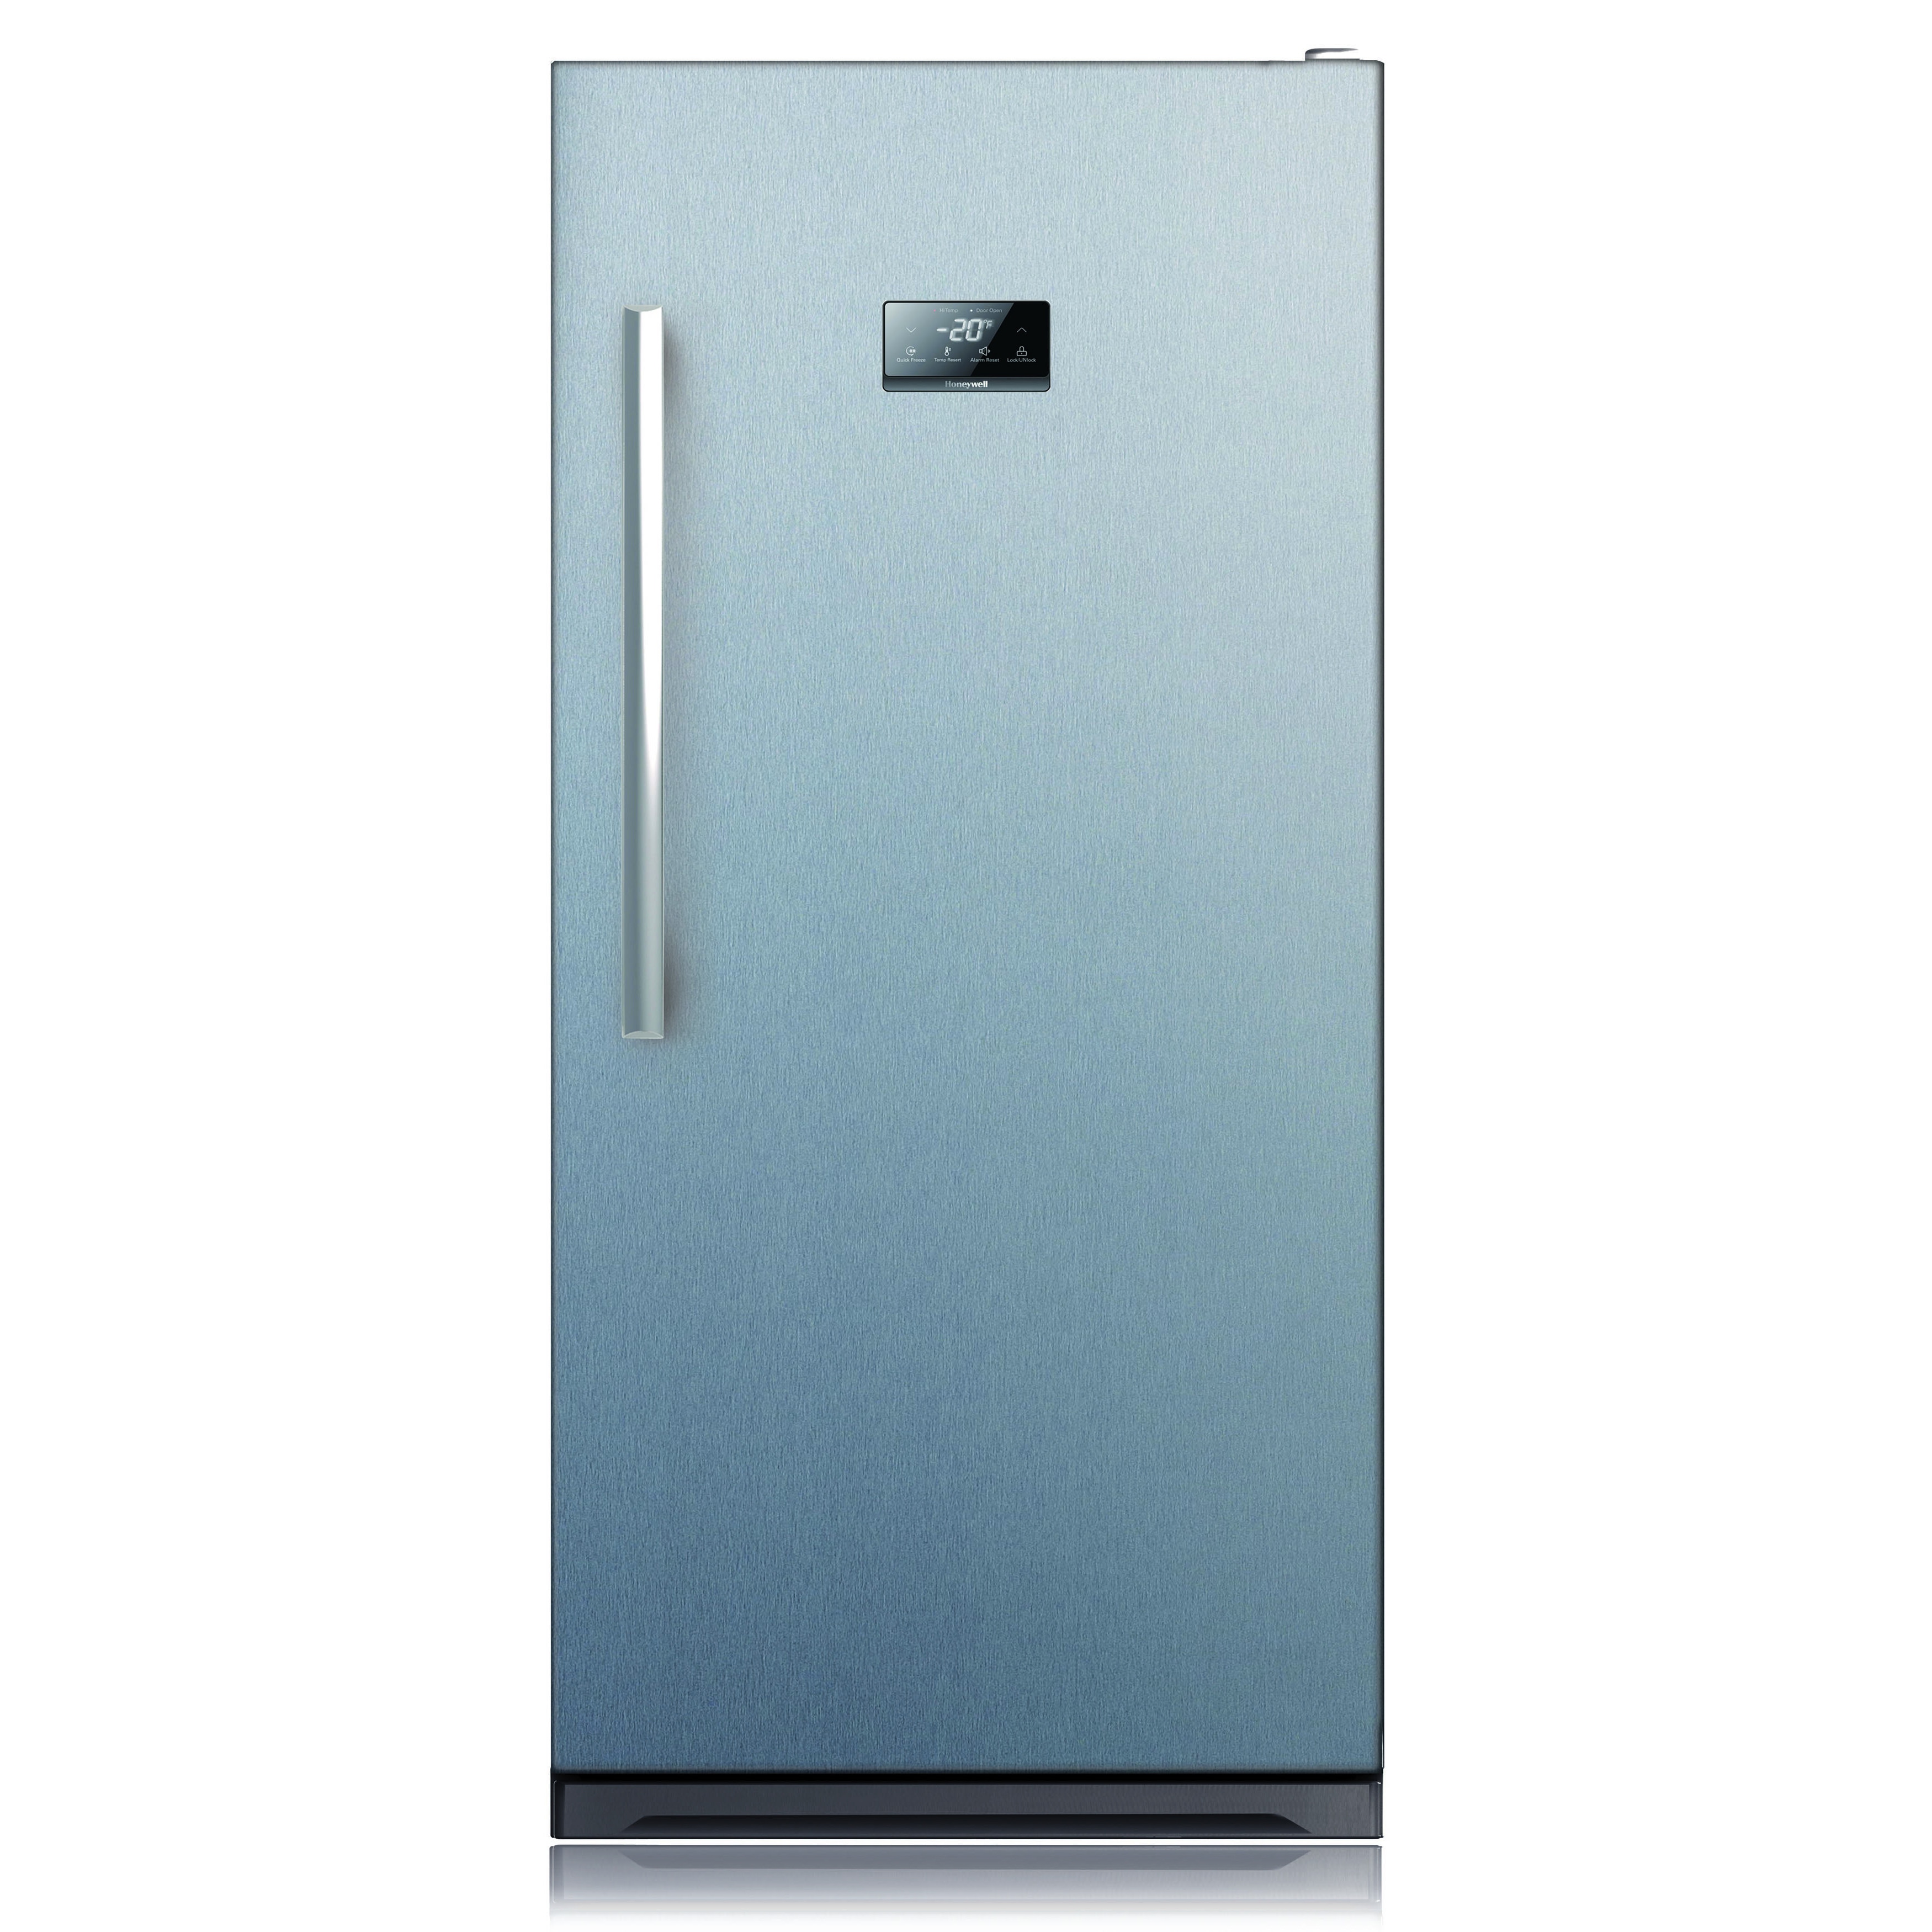 13.7 cubic Foot Stainless Steel Upright Freezer